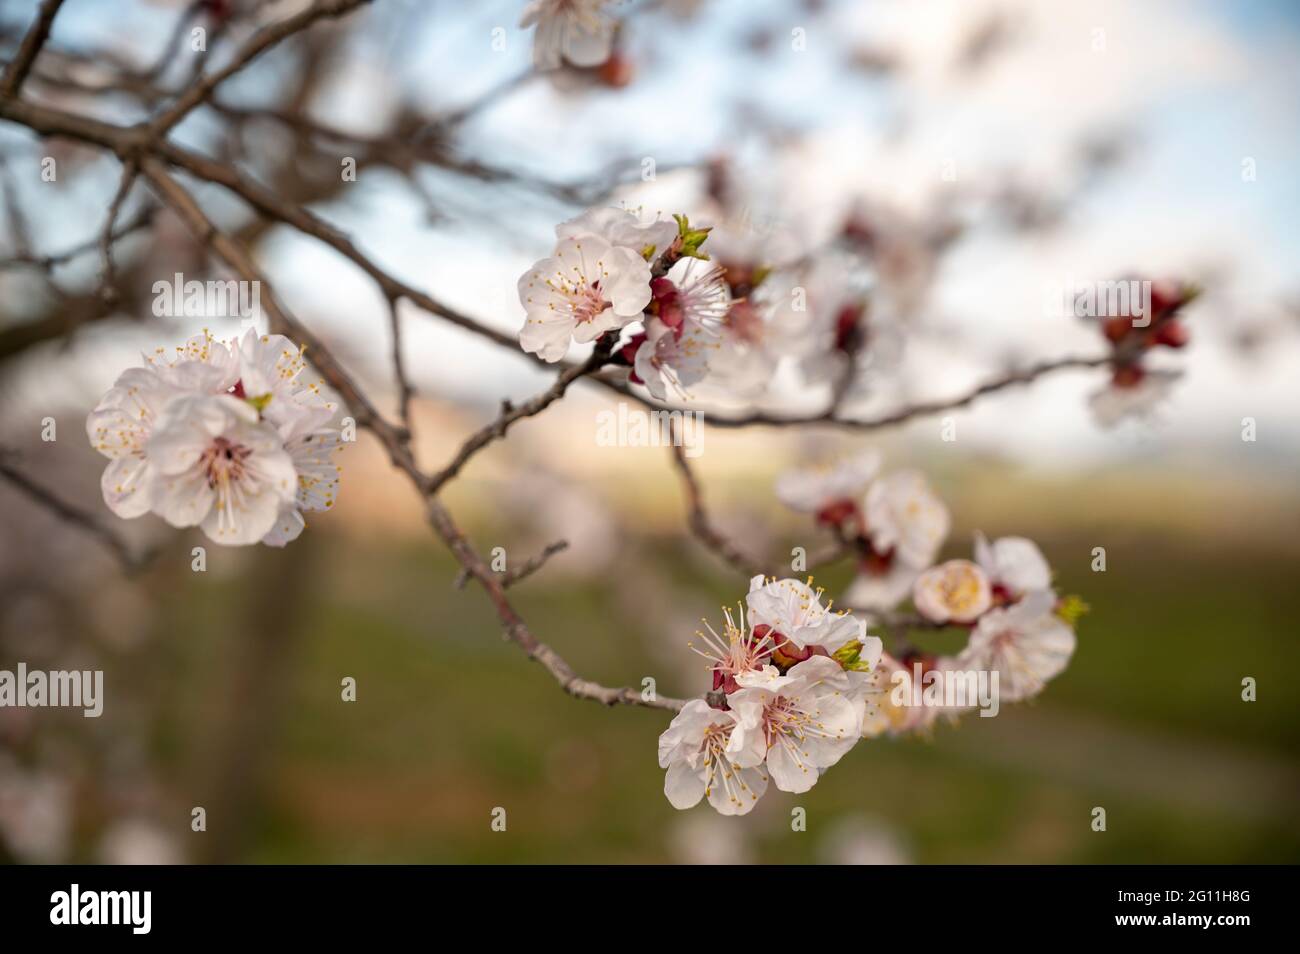 Blossoming of fruit trees in spring Stock Photo